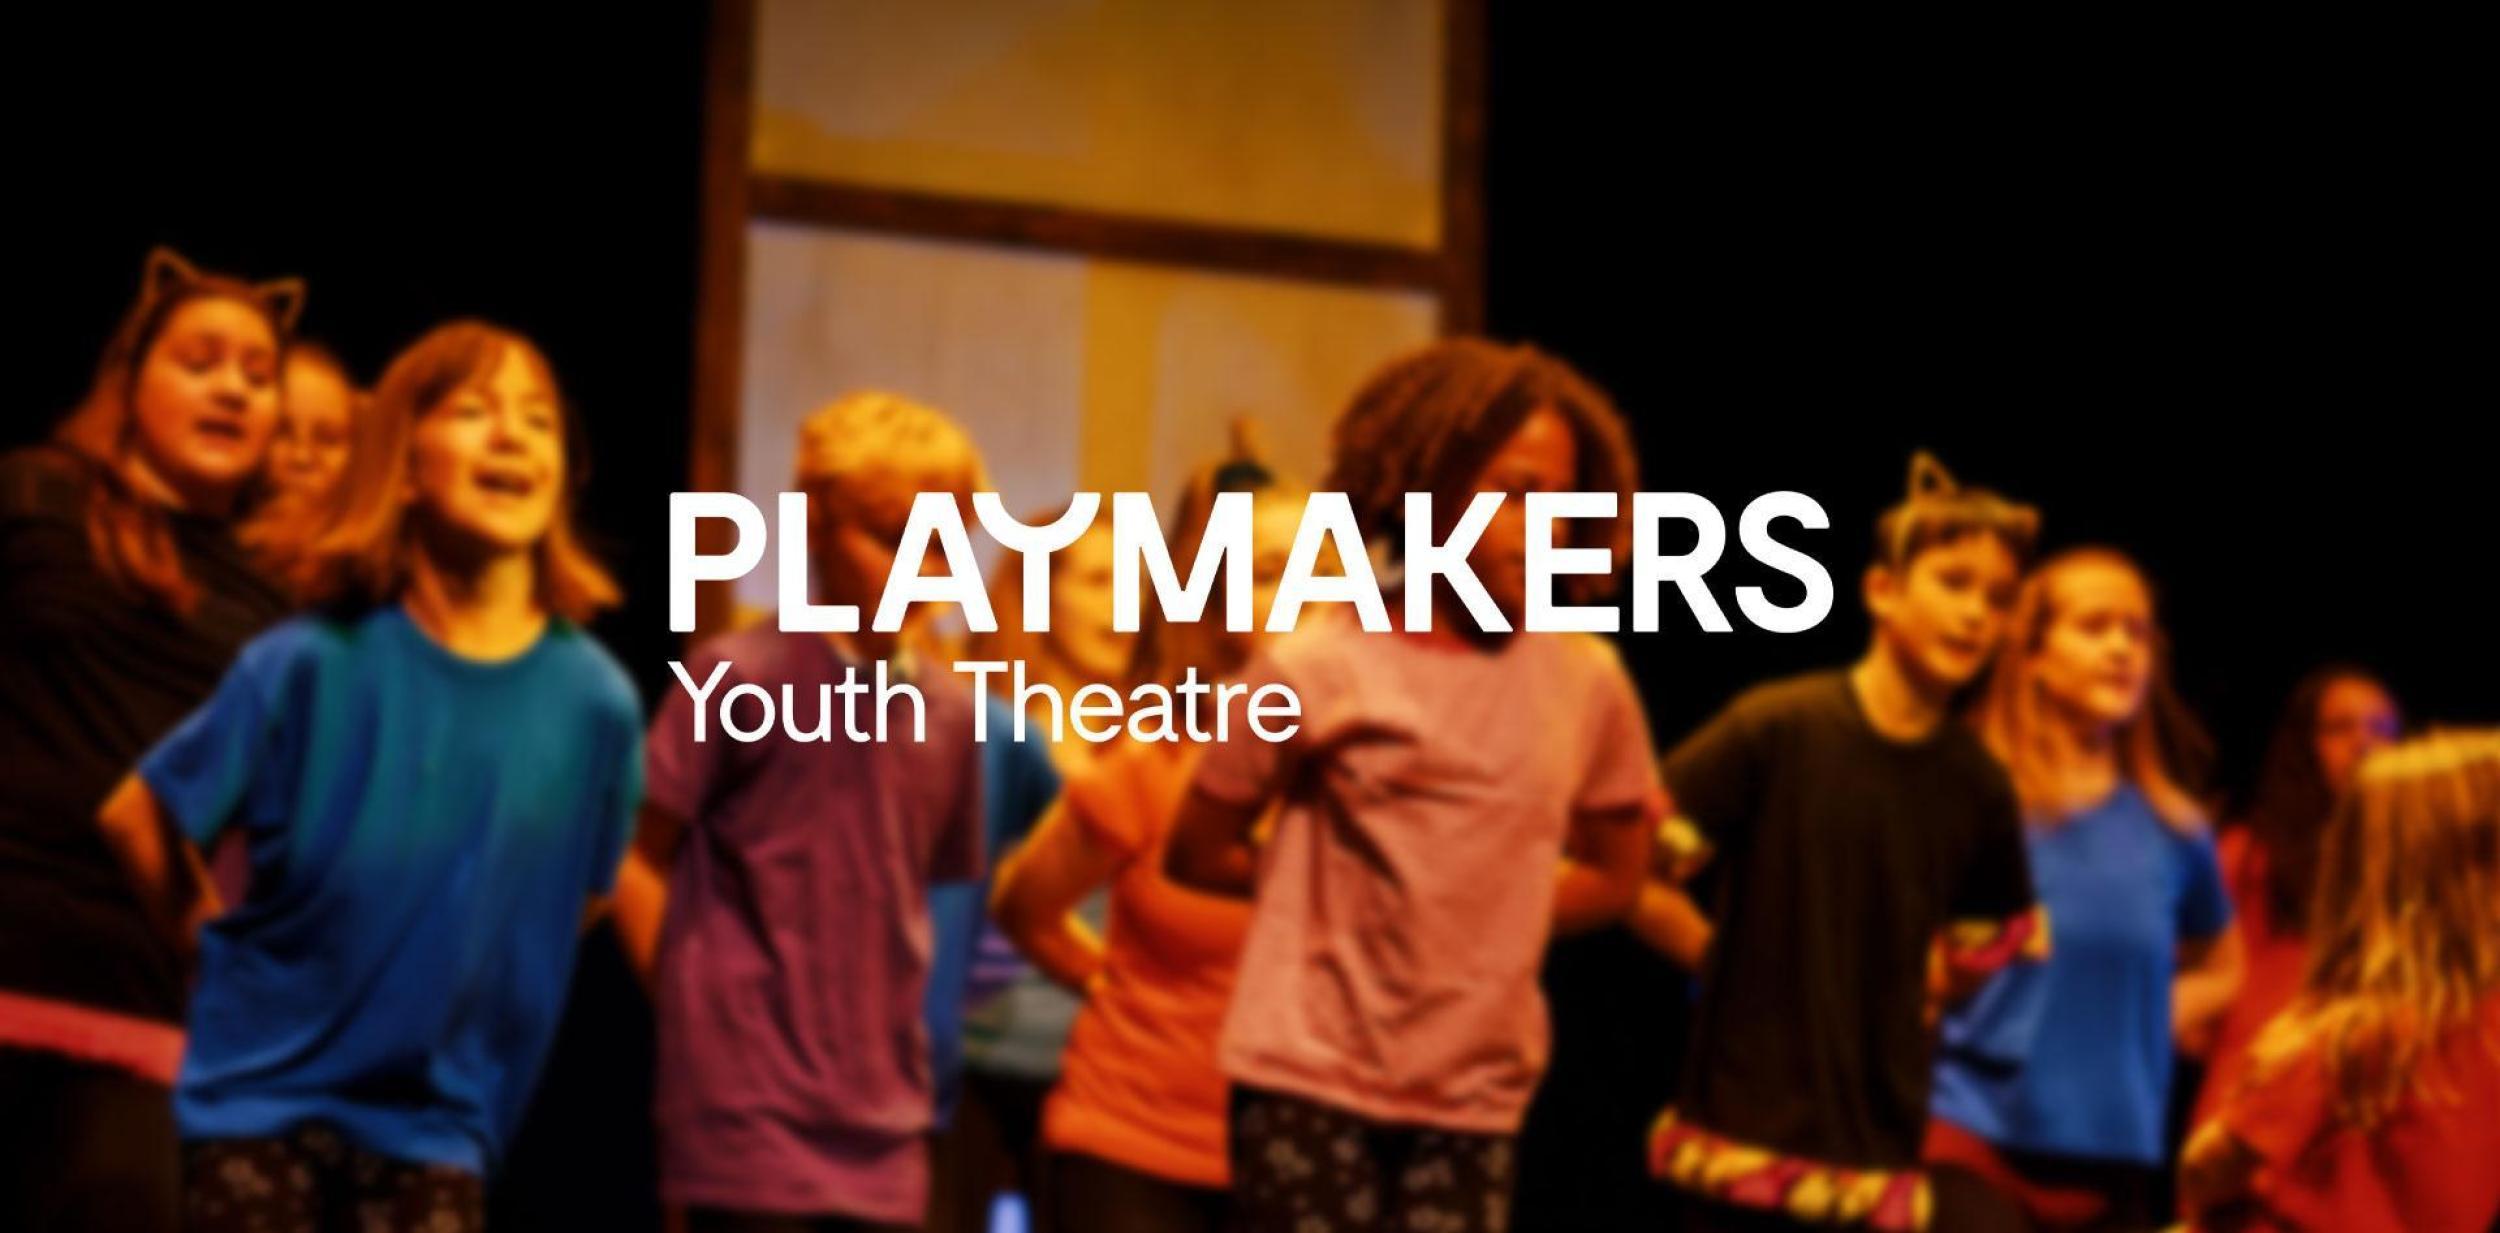 Playmakers Youth Theatre